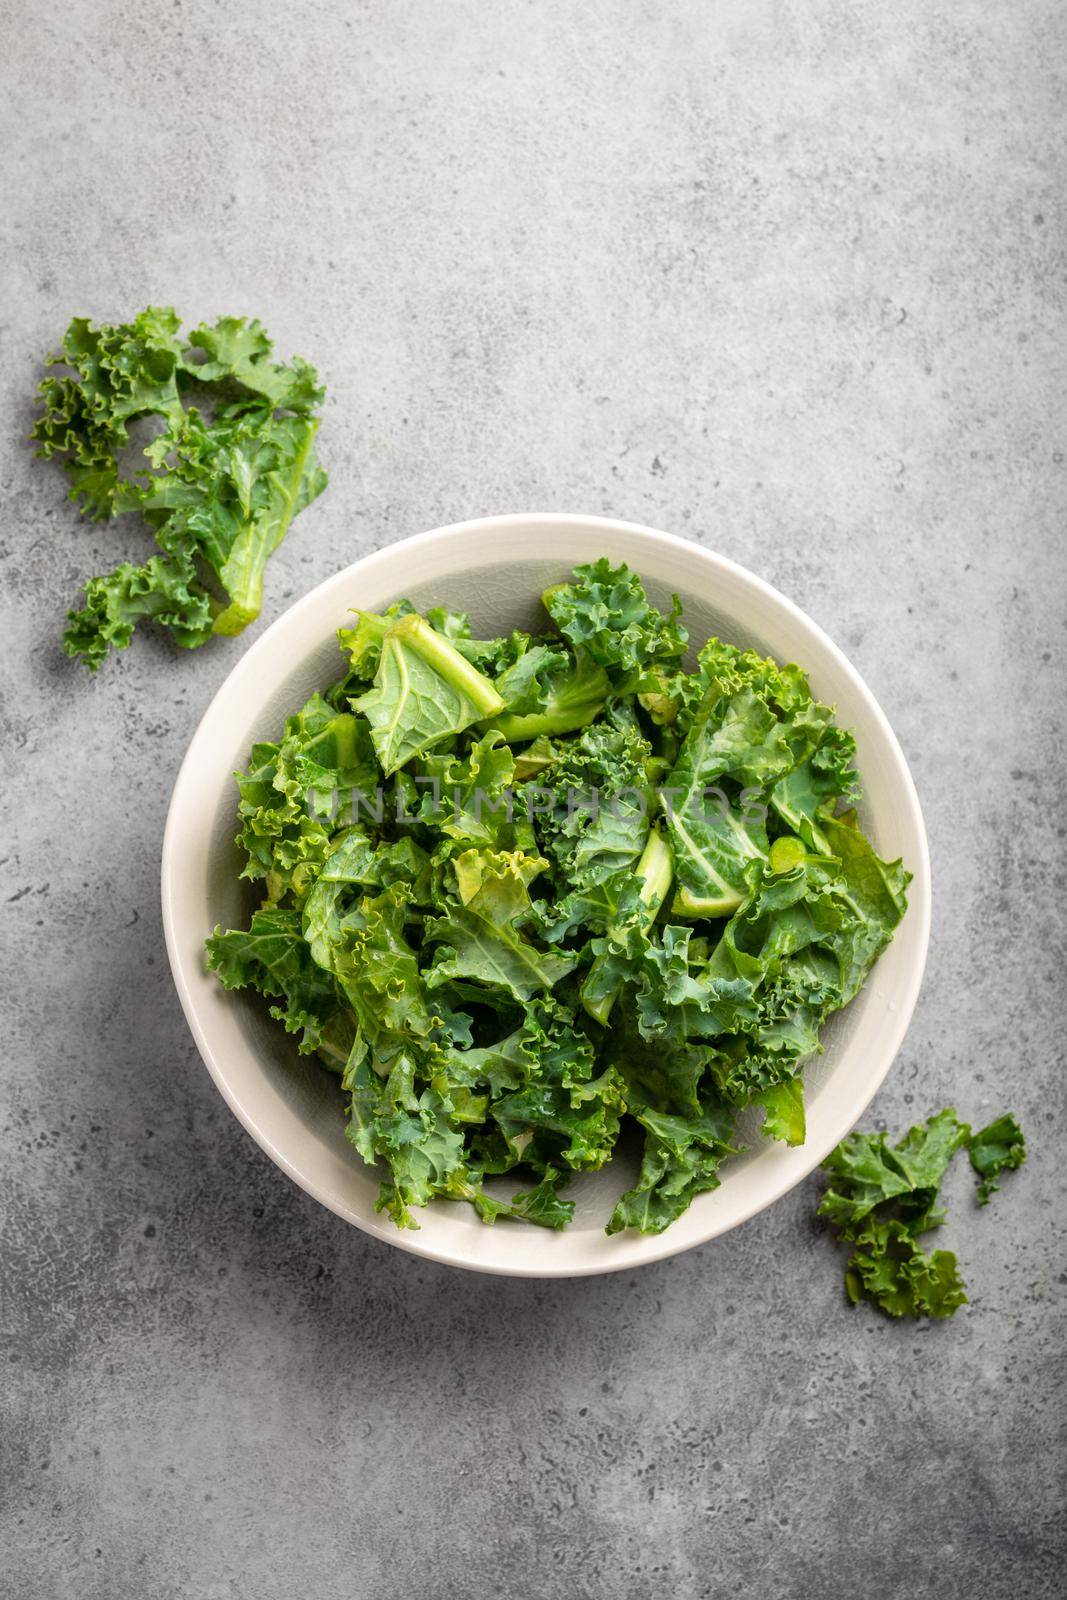 Bowl of fresh green chopped kale on gray rustic stone background, top view, close-up. Ingredient for making healthy salad. Clean eating, detox or diet concept